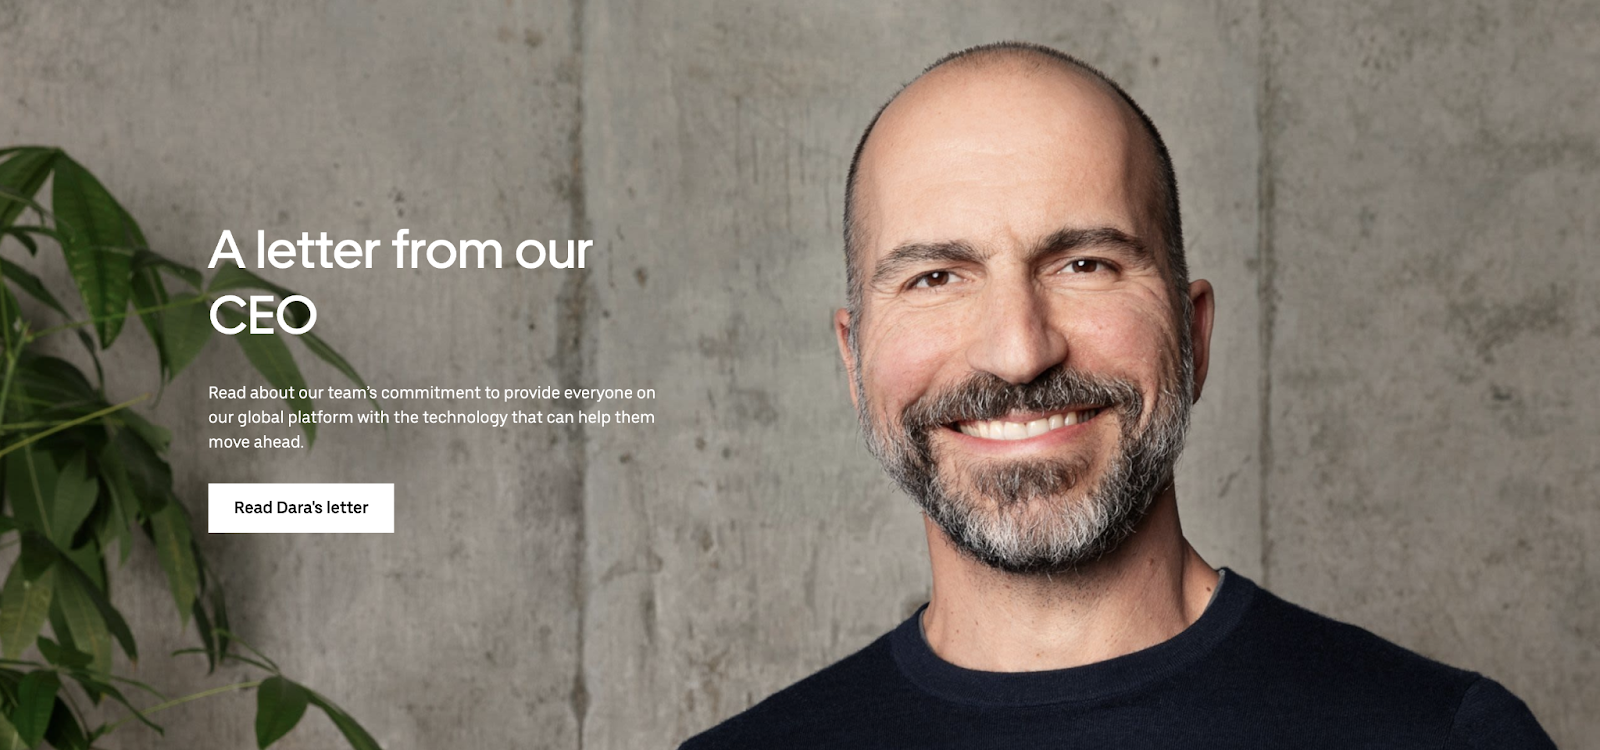 Uber lets its CEO’s voice shine through on its About Us page.